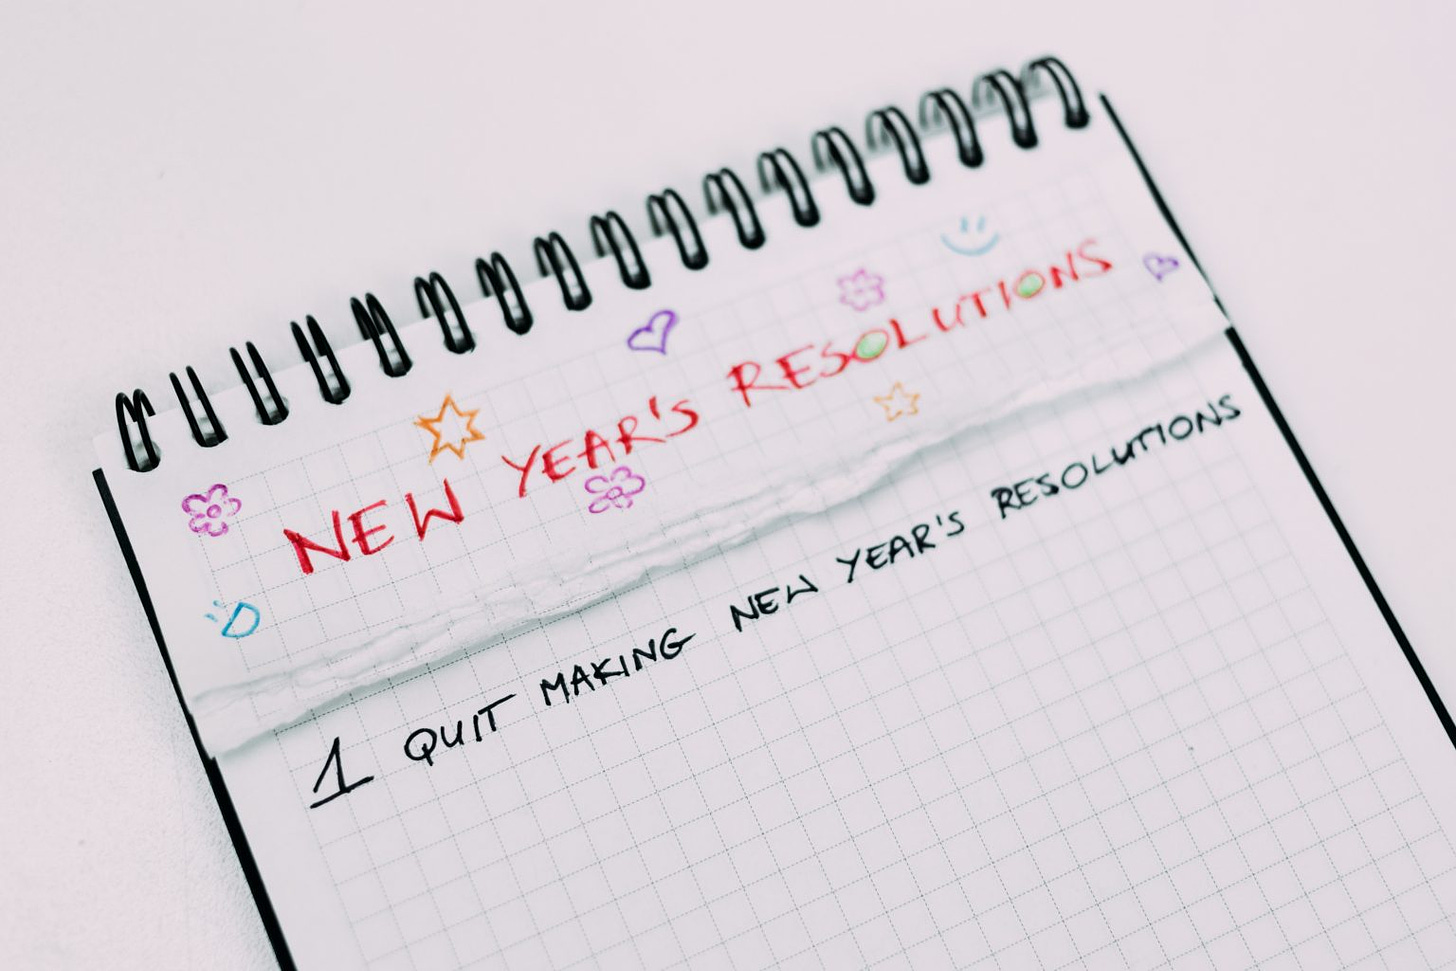 Most people are setting unrealistic goals as New Year resolutions - iRadio